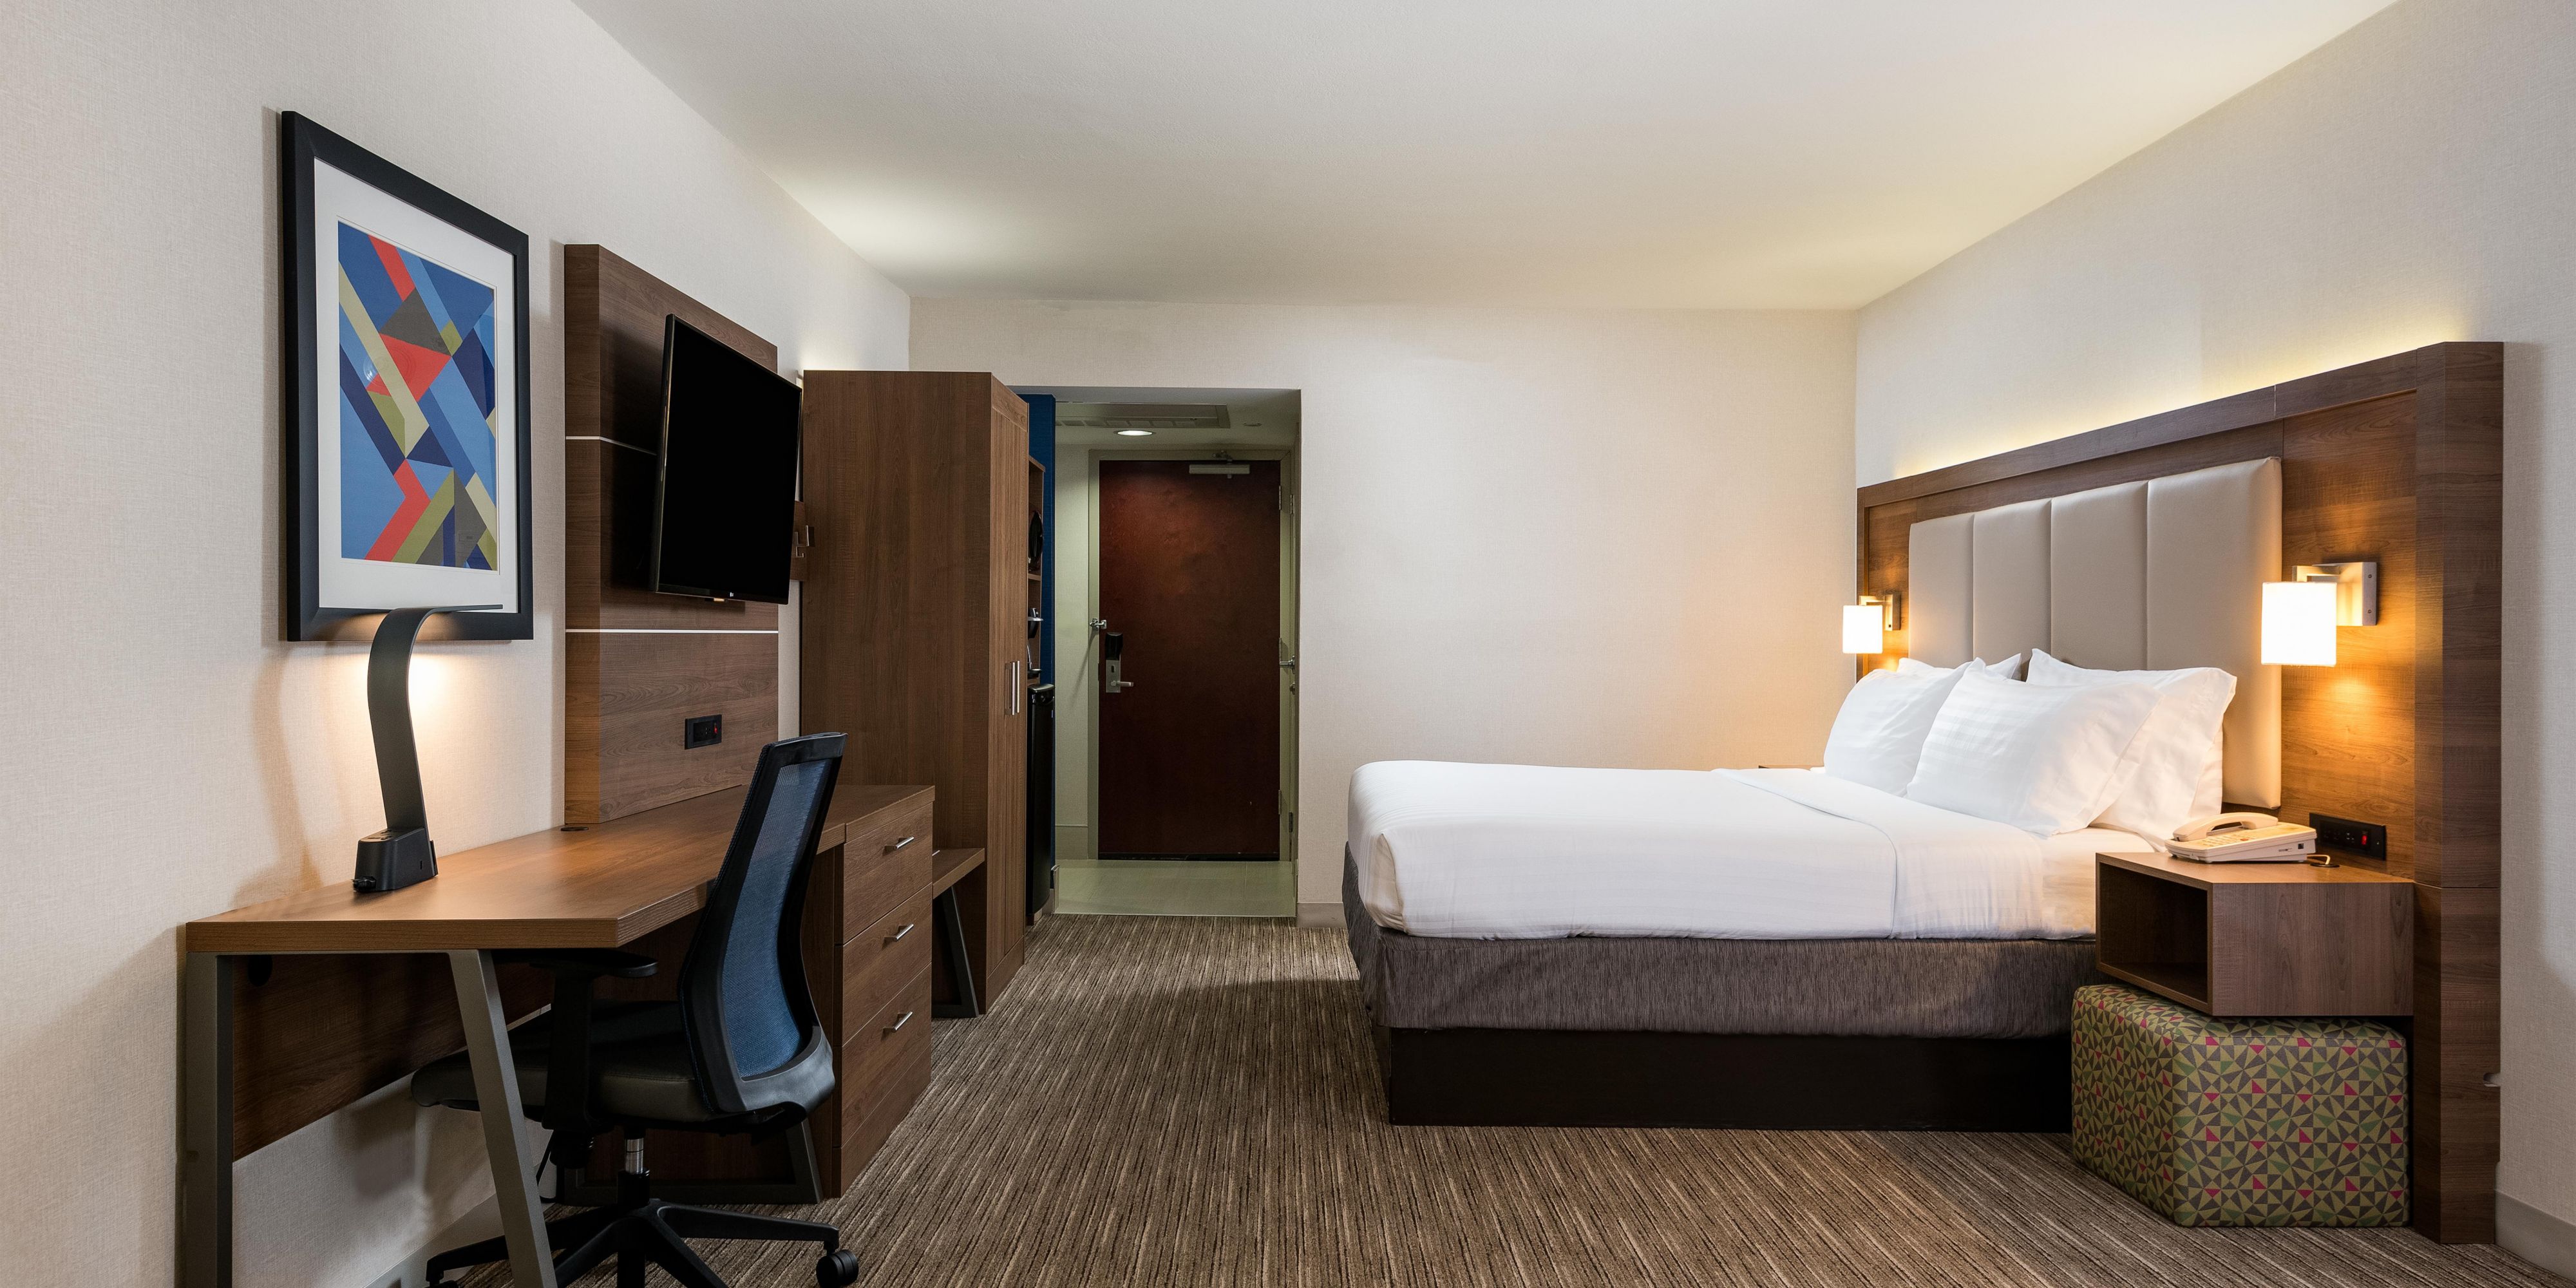 The hotel went through a full renovation in 2018. Guest rooms all include microwaves, refrigerators, and Keurig coffee makers. Each guest room includes a New Mattress so you can sleep comfortably as you would in your own home.